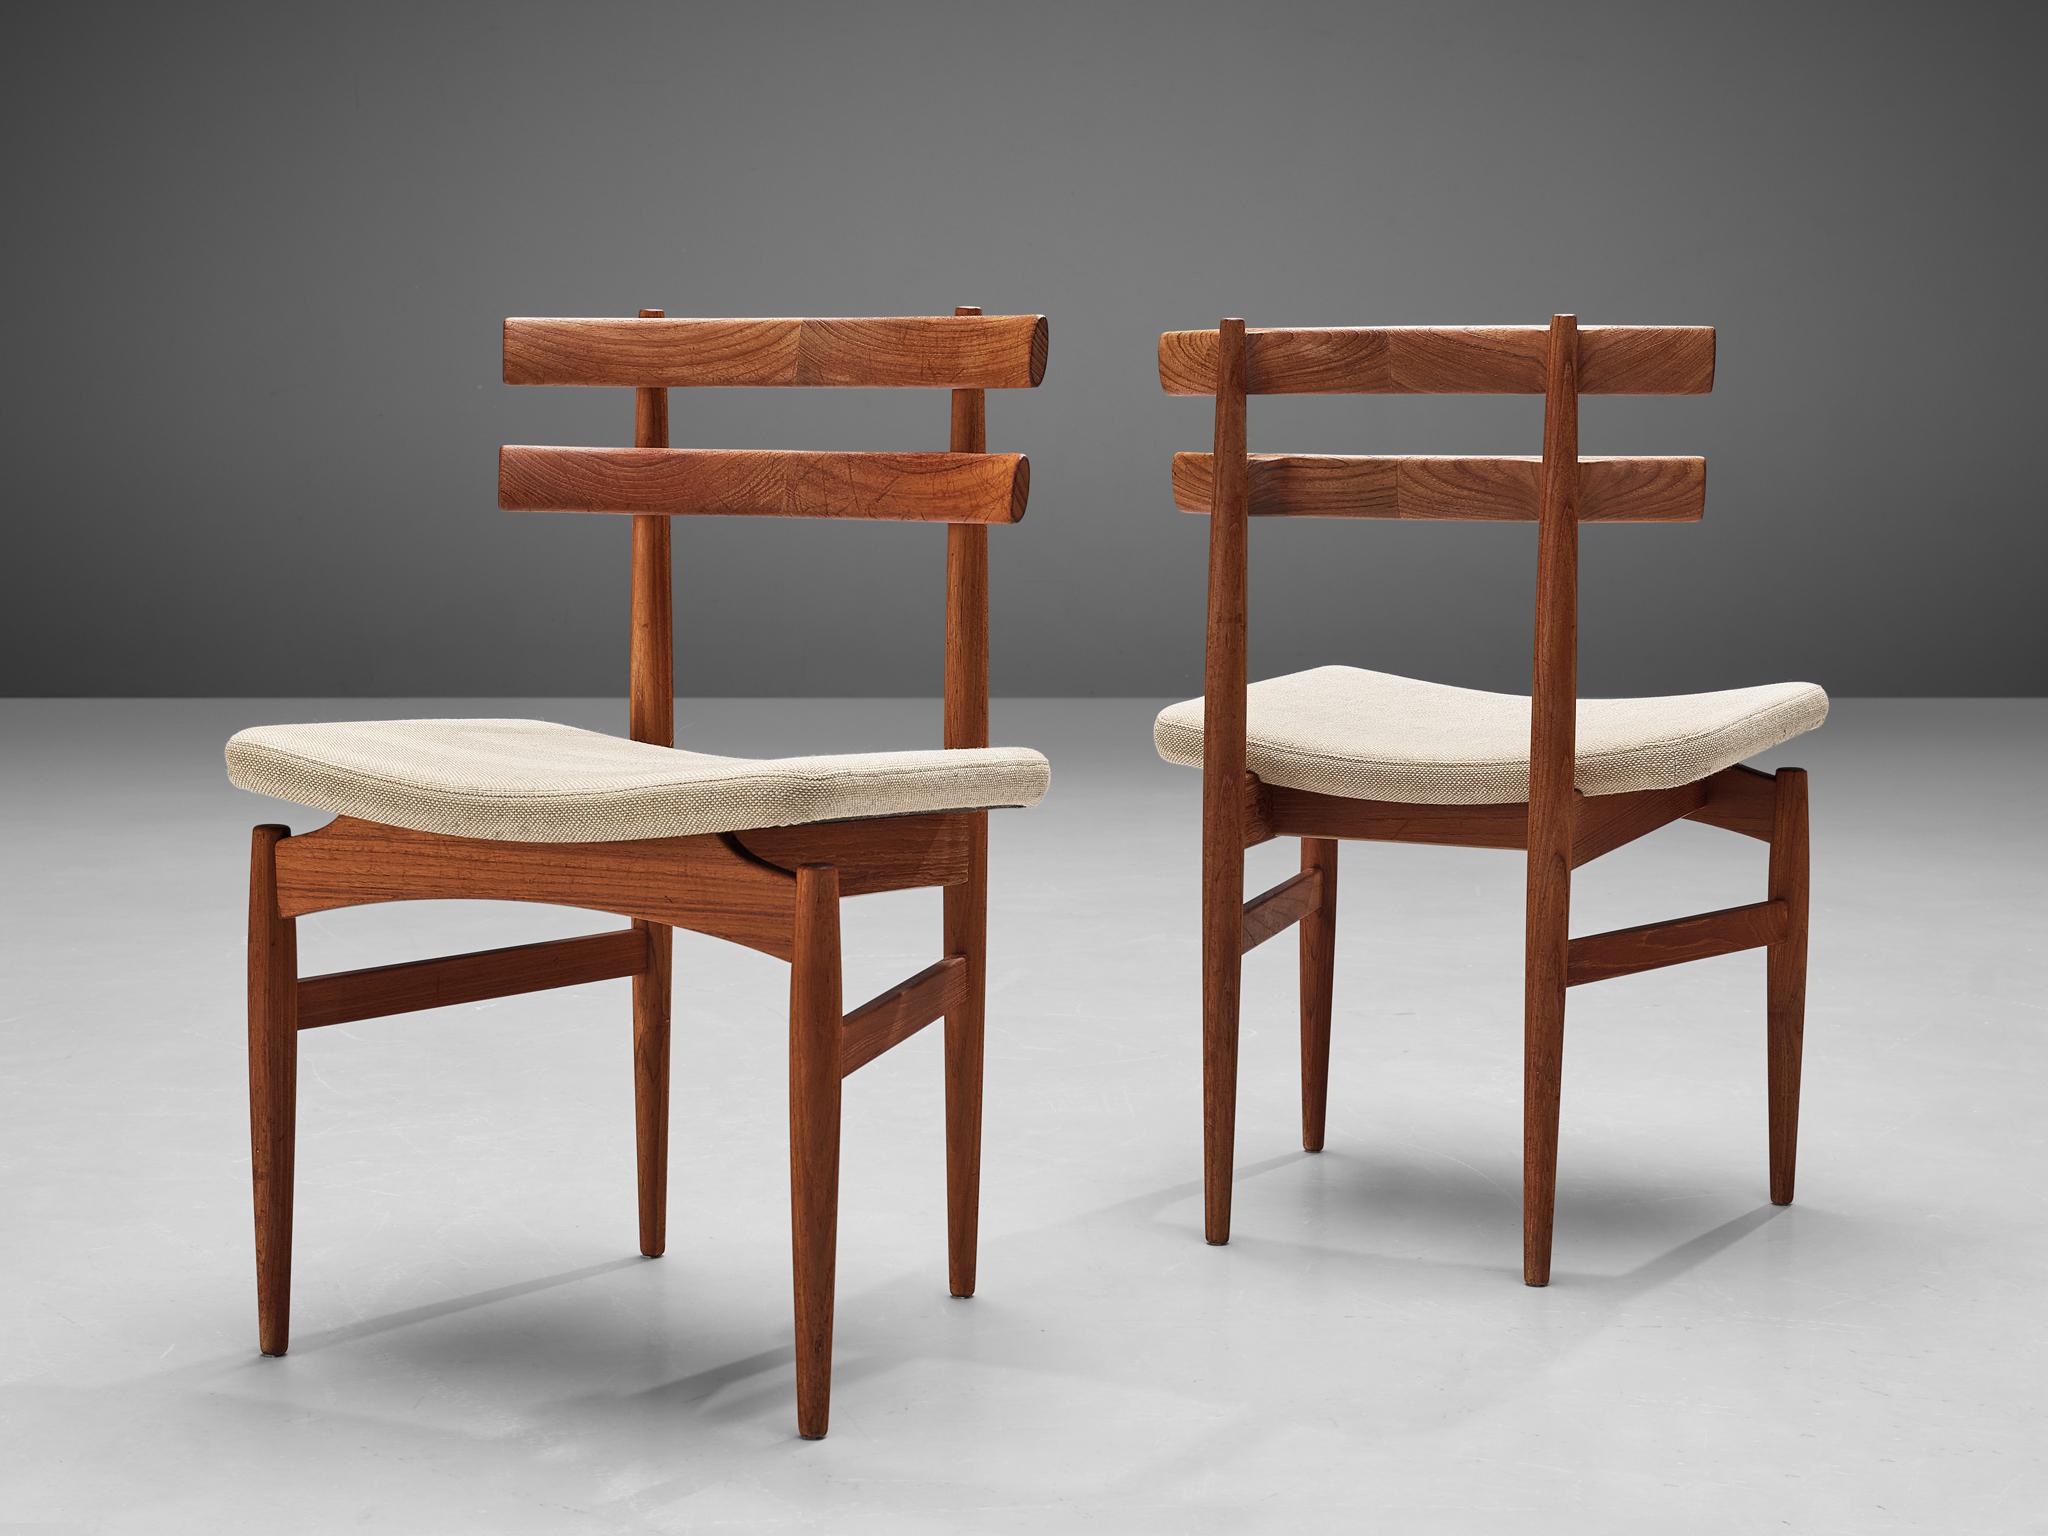 Poul Hundevad, pair of dining chairs model '30', teak, fabric, Denmark, 1960s

Pair of dining room chairs in teak and beige fabric upholstery designed by Poul Hundevad. These chairs have a beautiful architectural design, characteristic as